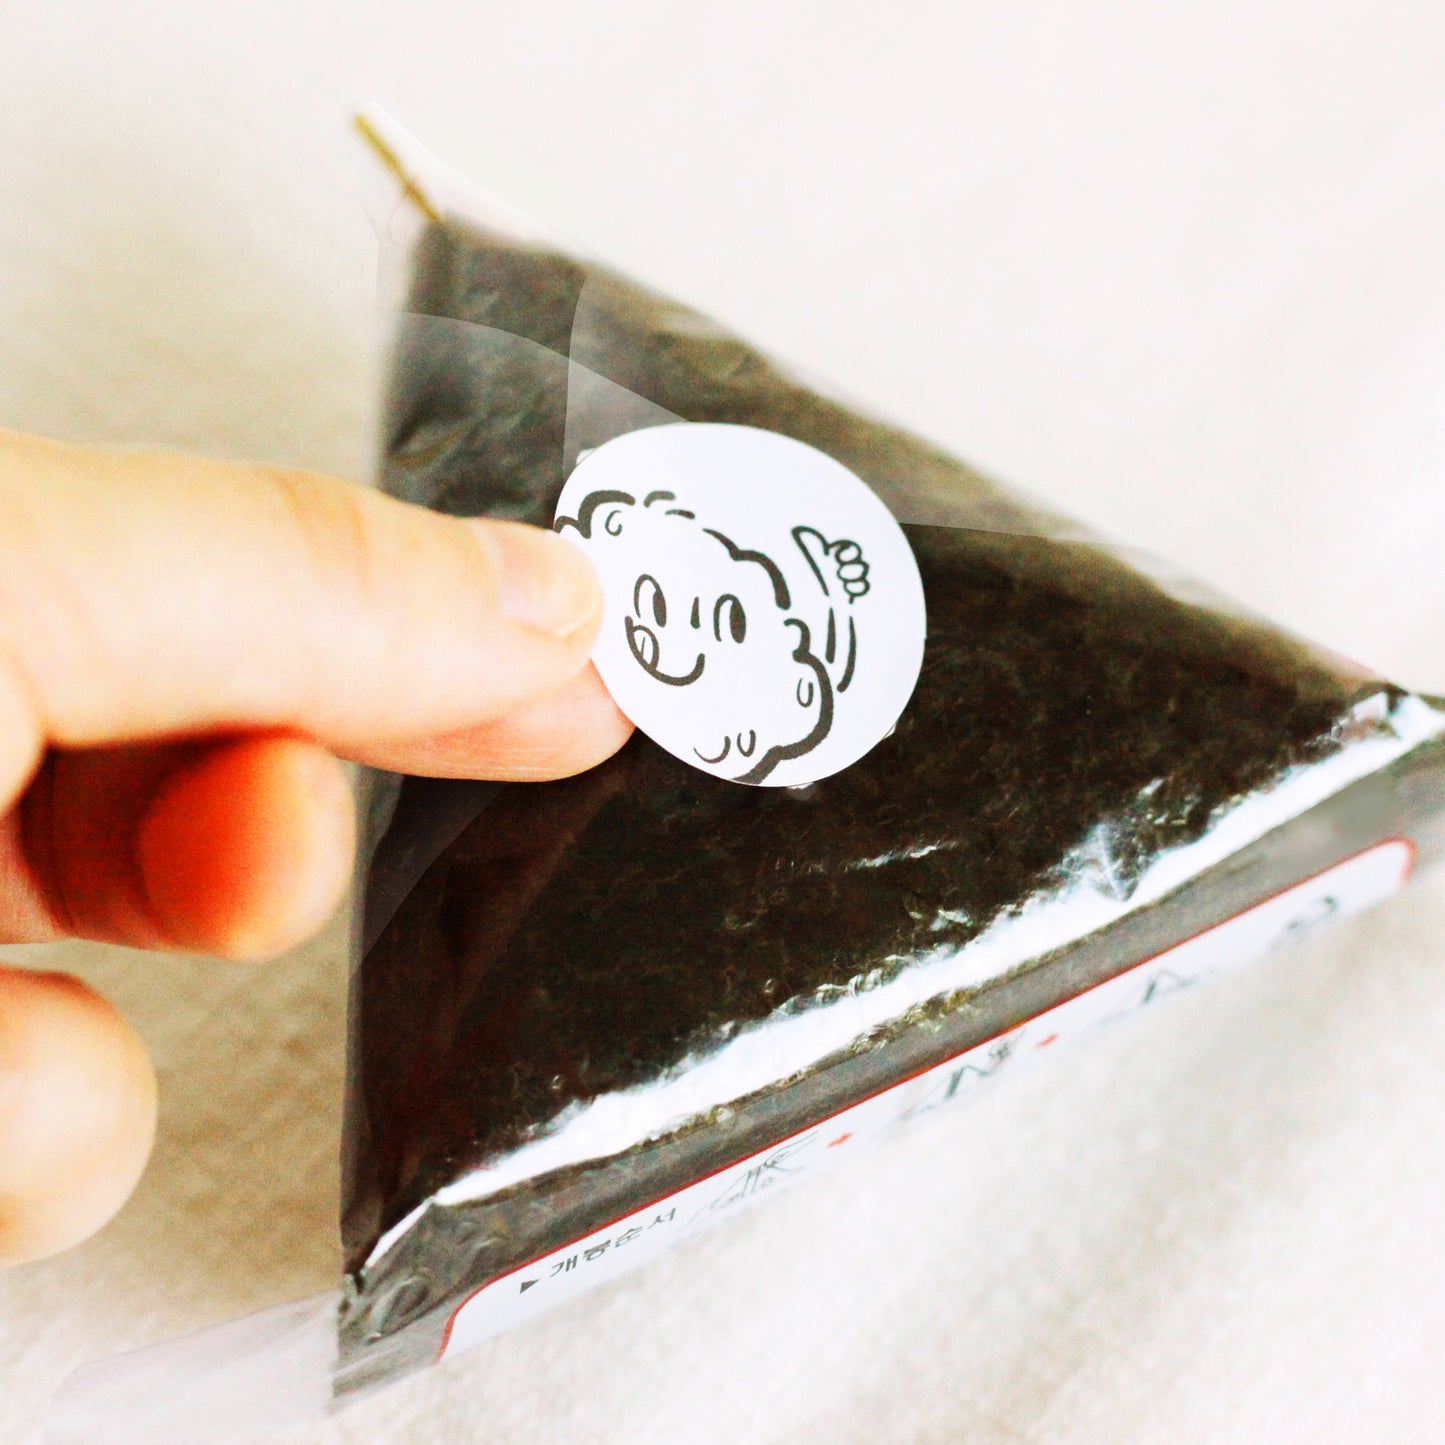 Double Roasted Onigiri Seaweed (40 sheets) - Unsalted (10months+)